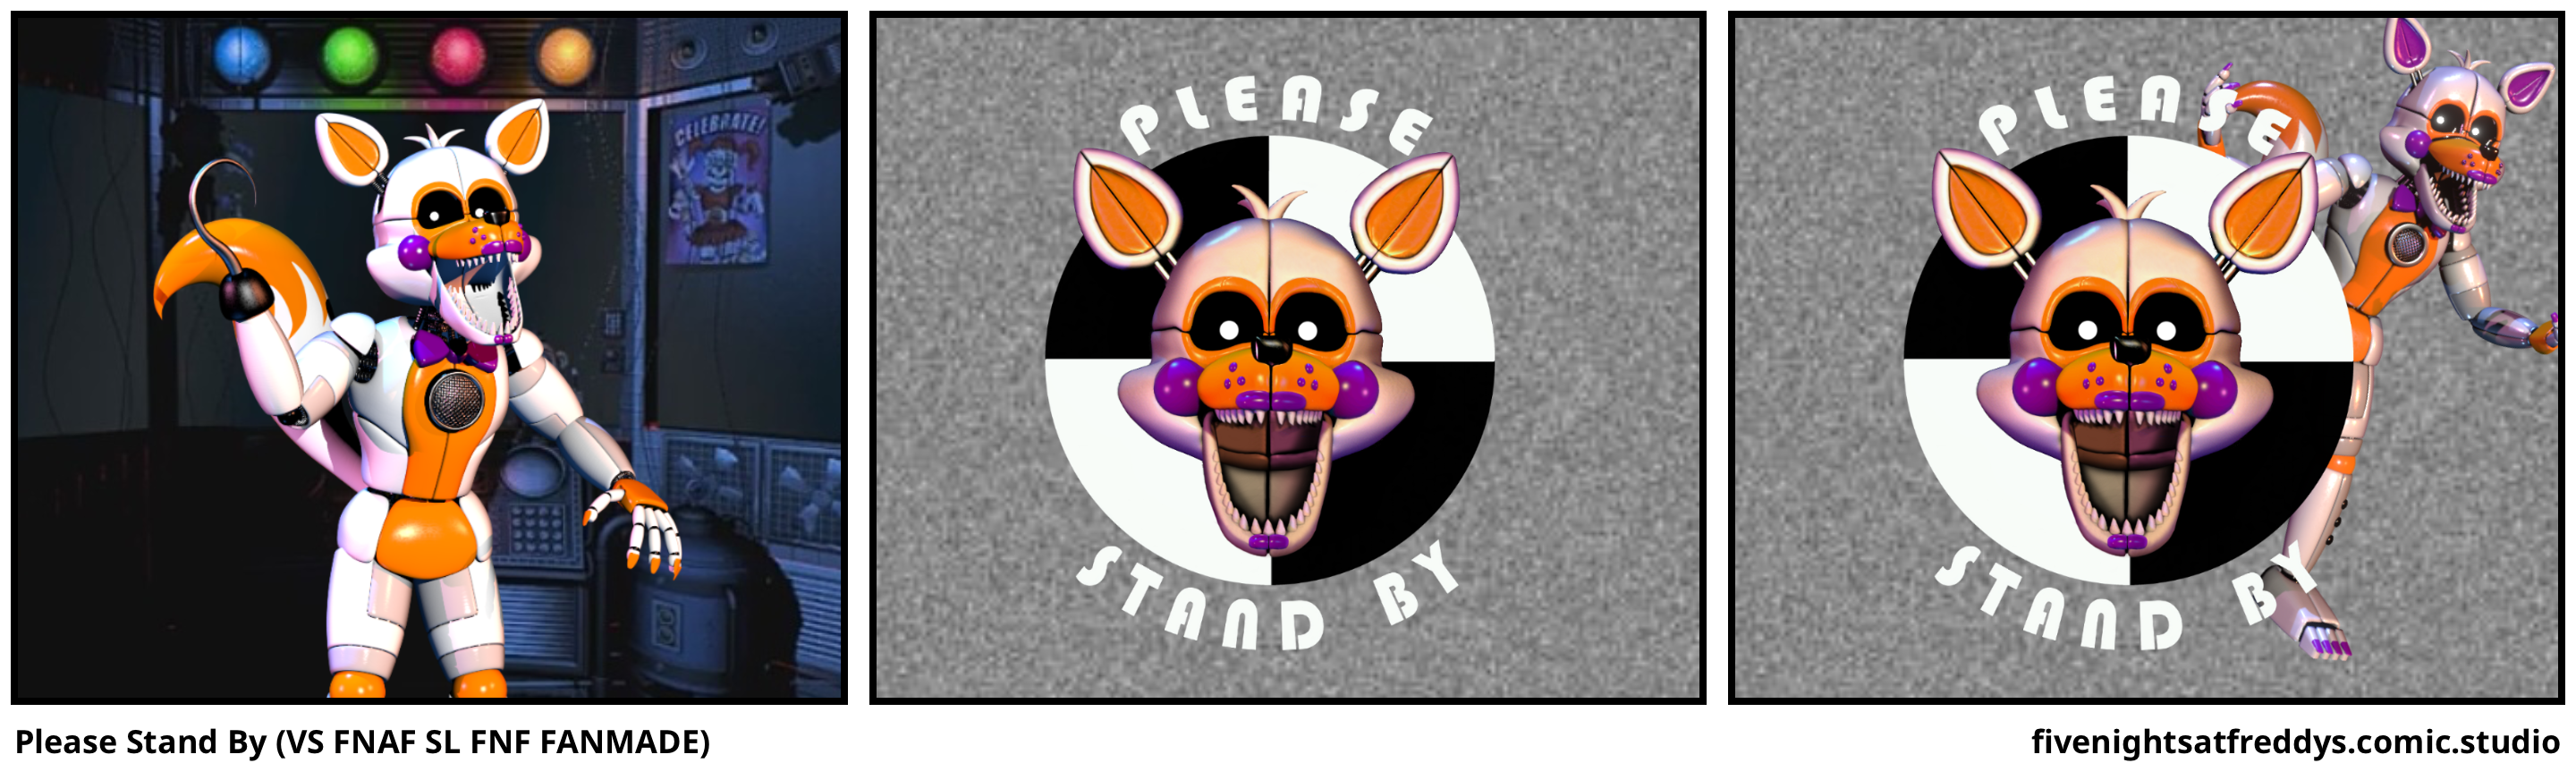 Please Stand By (VS FNAF SL FNF FANMADE)